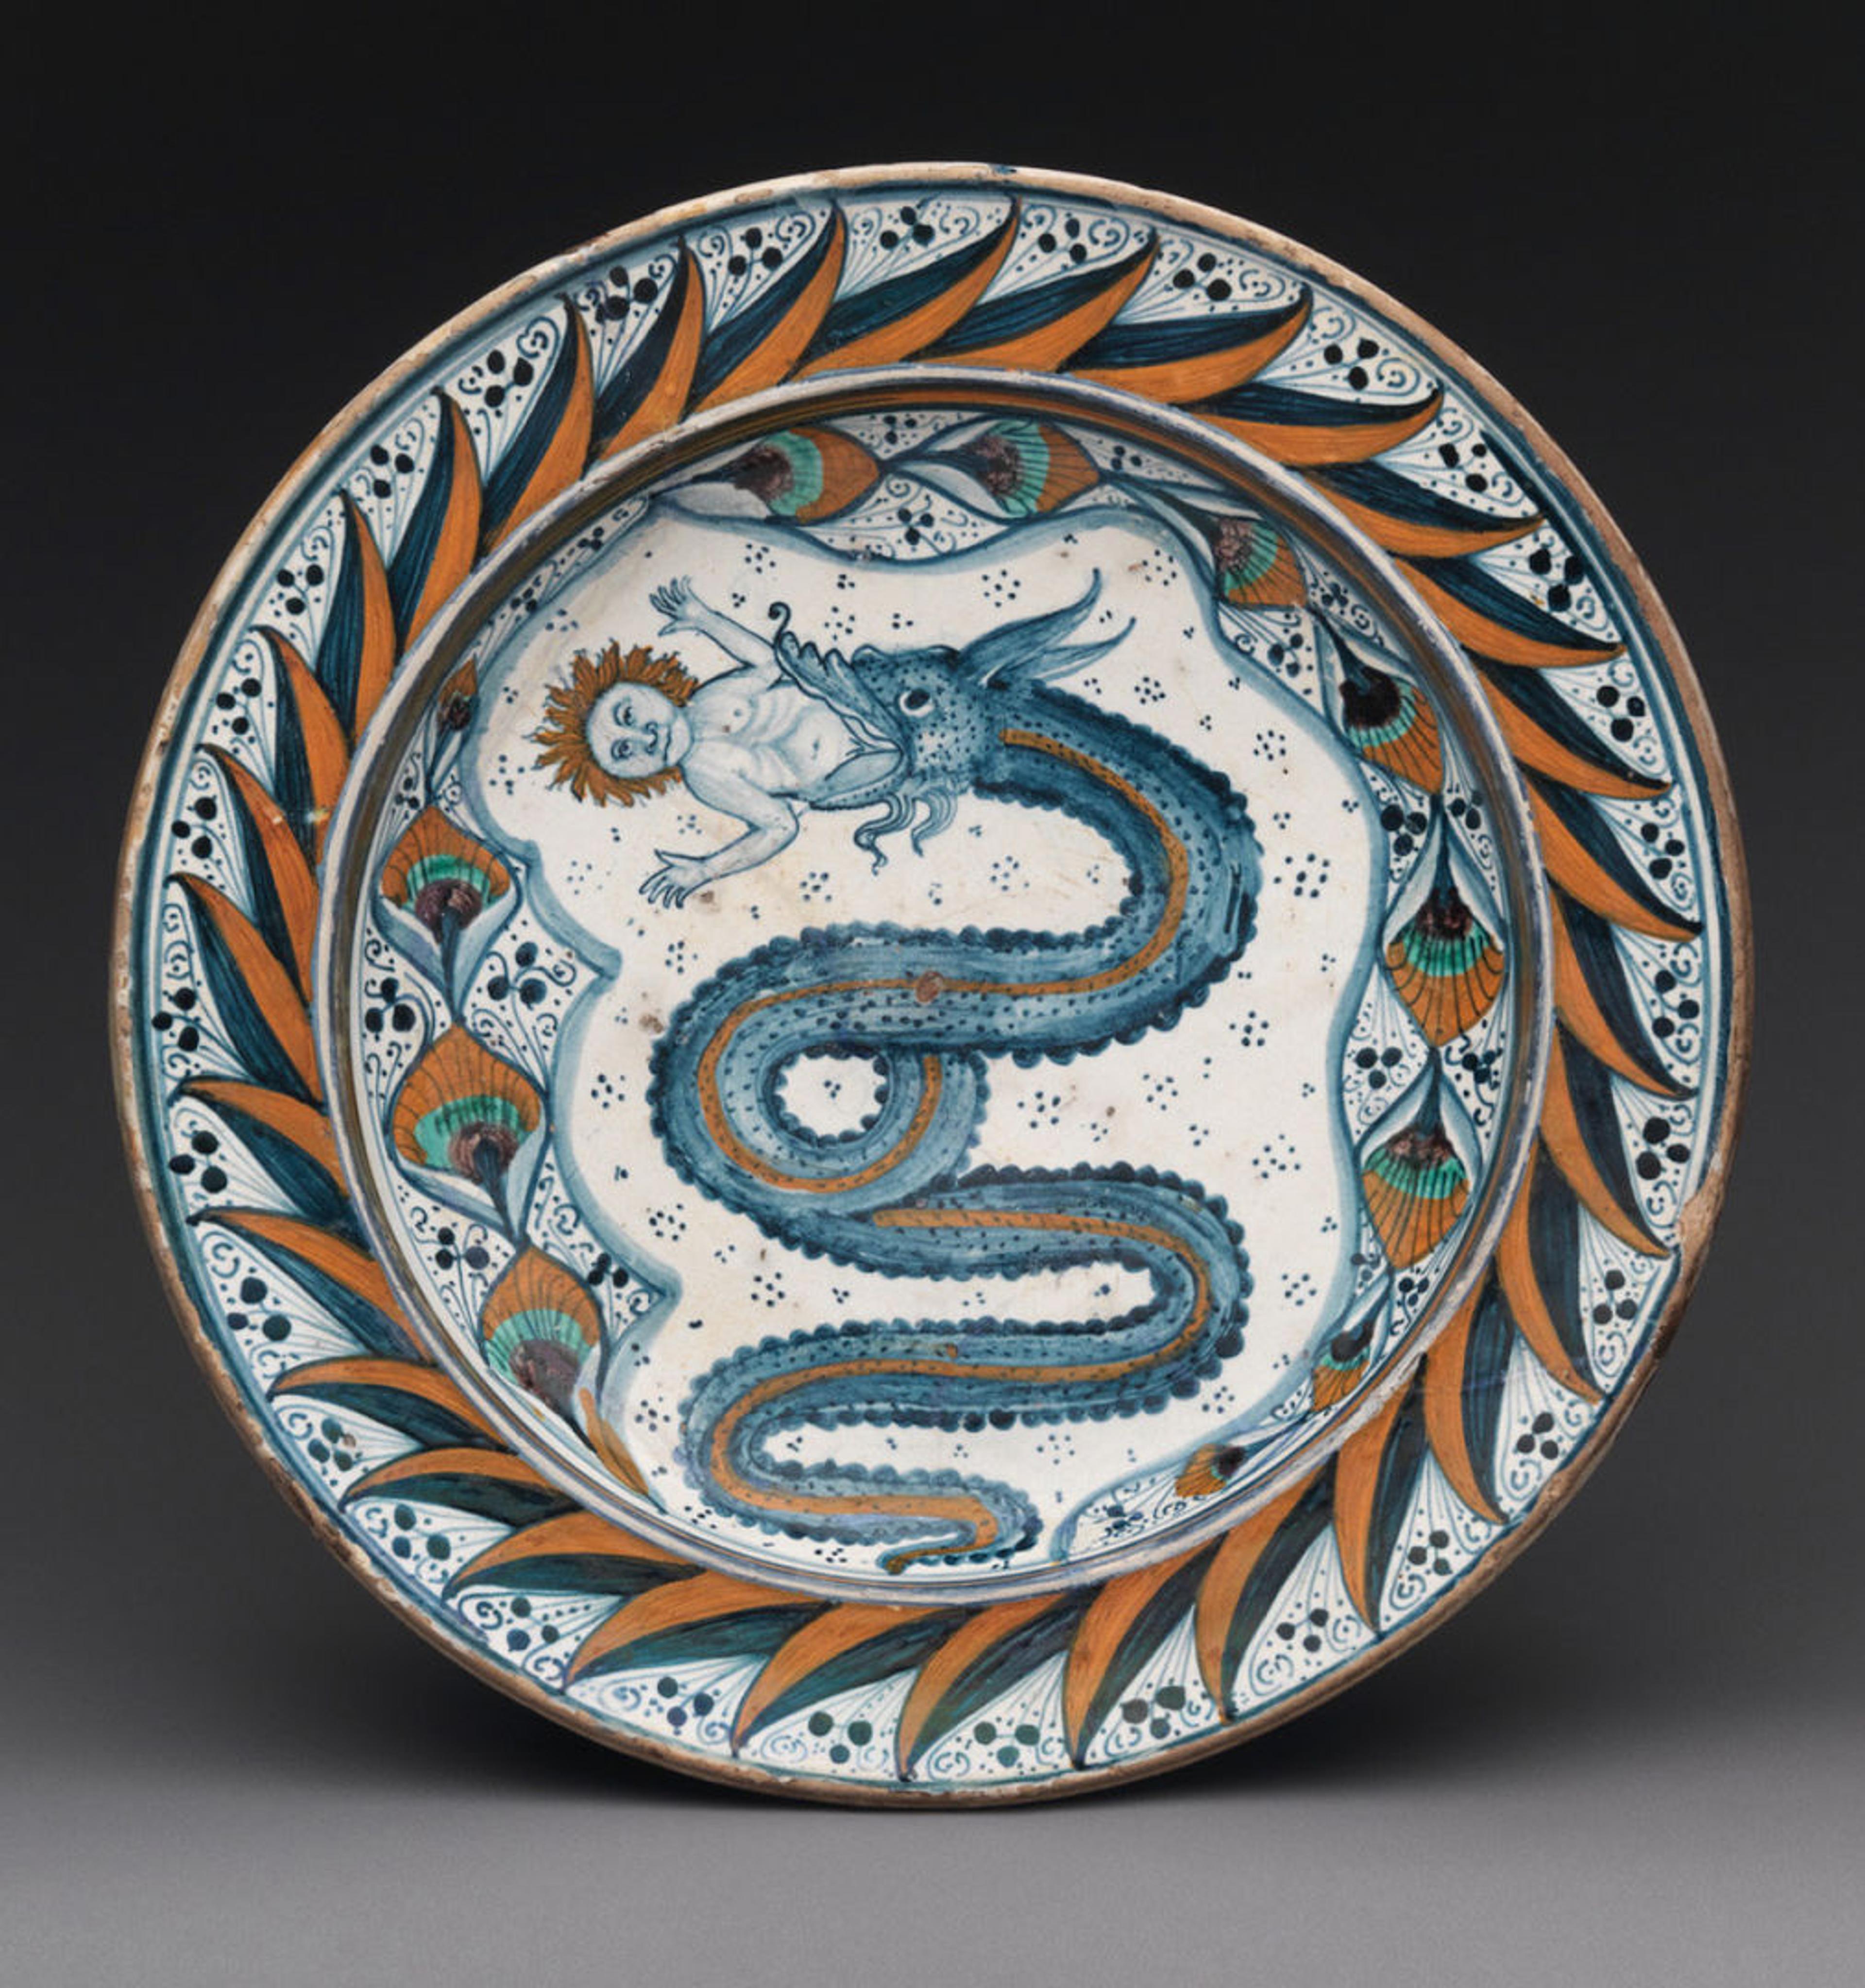 Maiolica (tin-glazed earthenware) featuring the arms of Visconti, an image of a dragon eating a nude man